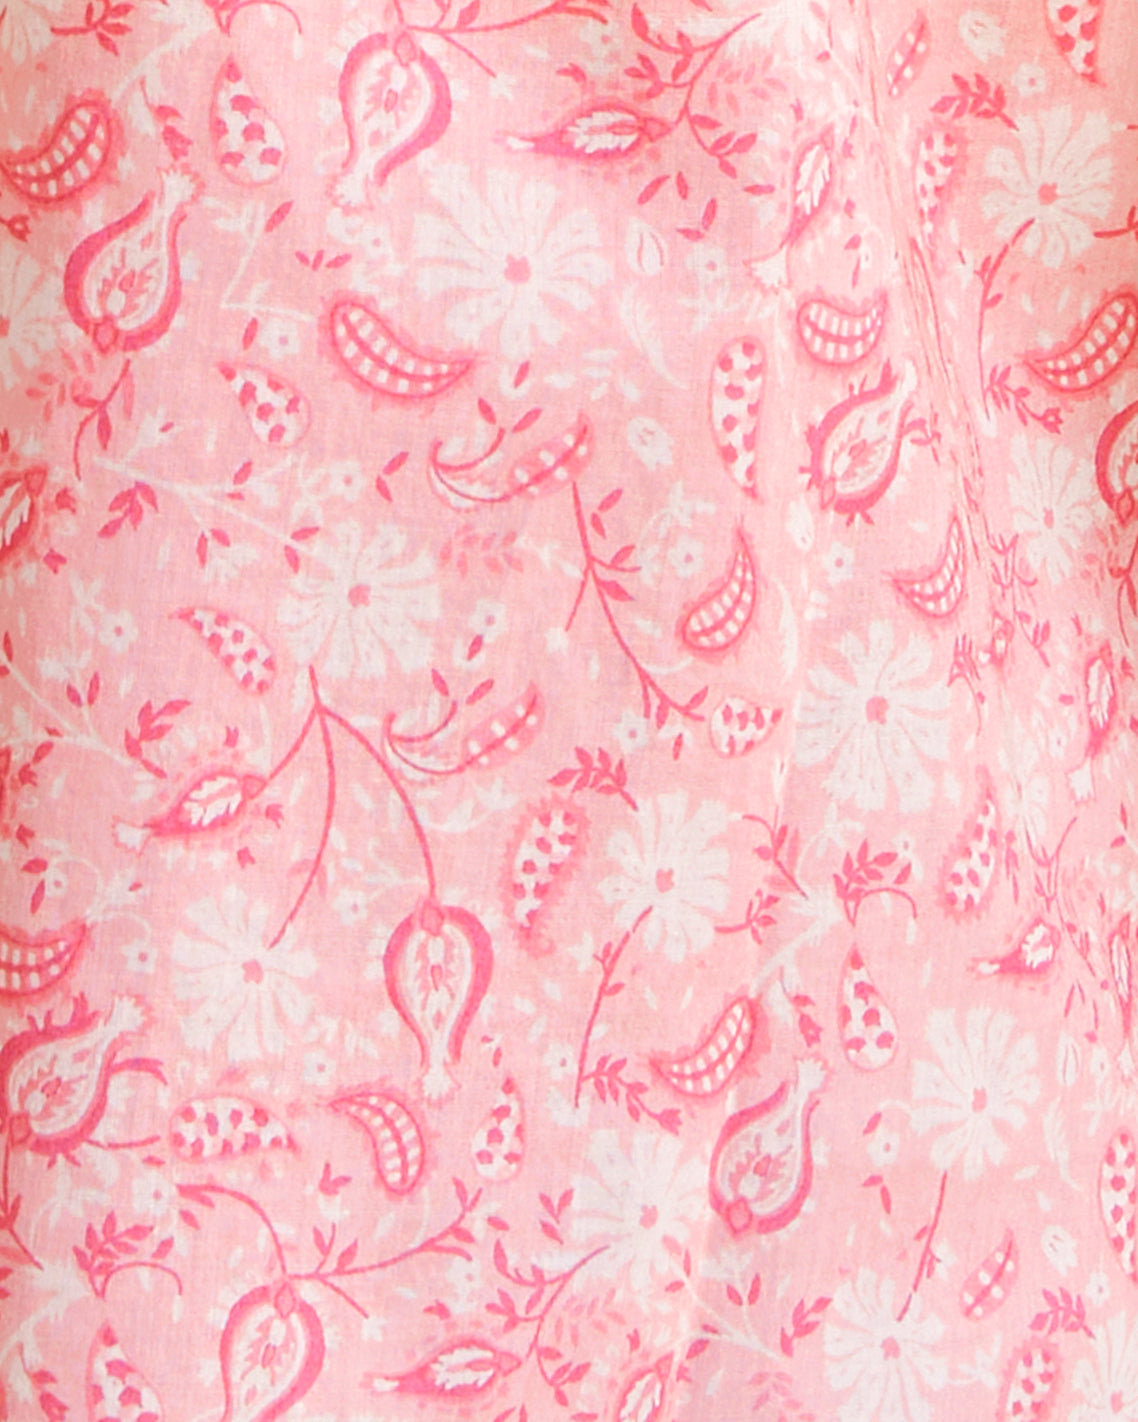 Pull on Ruffled Skirt in Pink Paisley